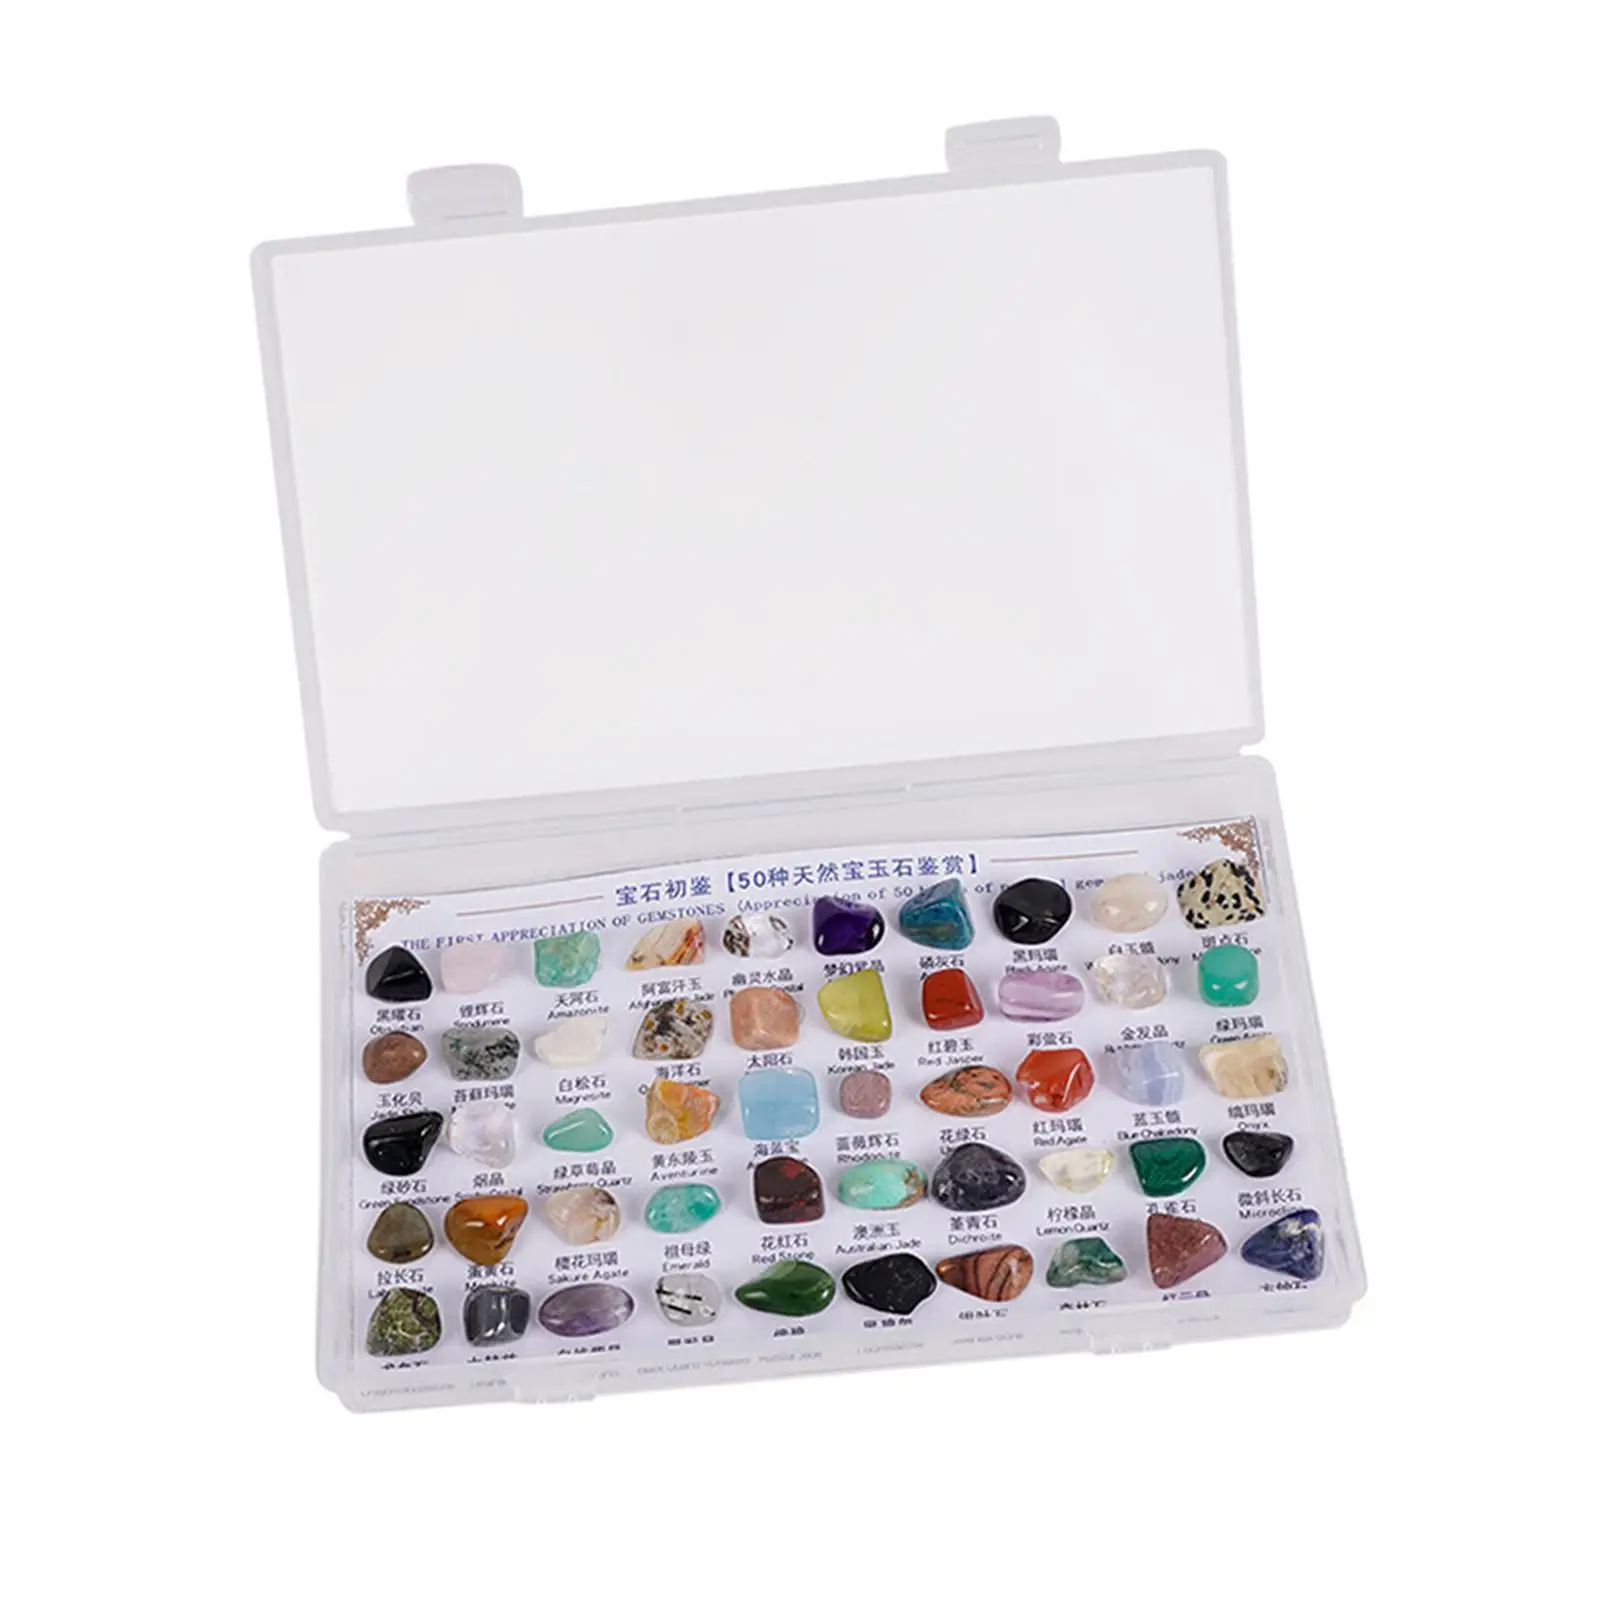 

50Pcs Rough Stones Geology Science Learning Educational Party Favors Mineral Rocks for Craft Gift Jewelry Making Gift Display